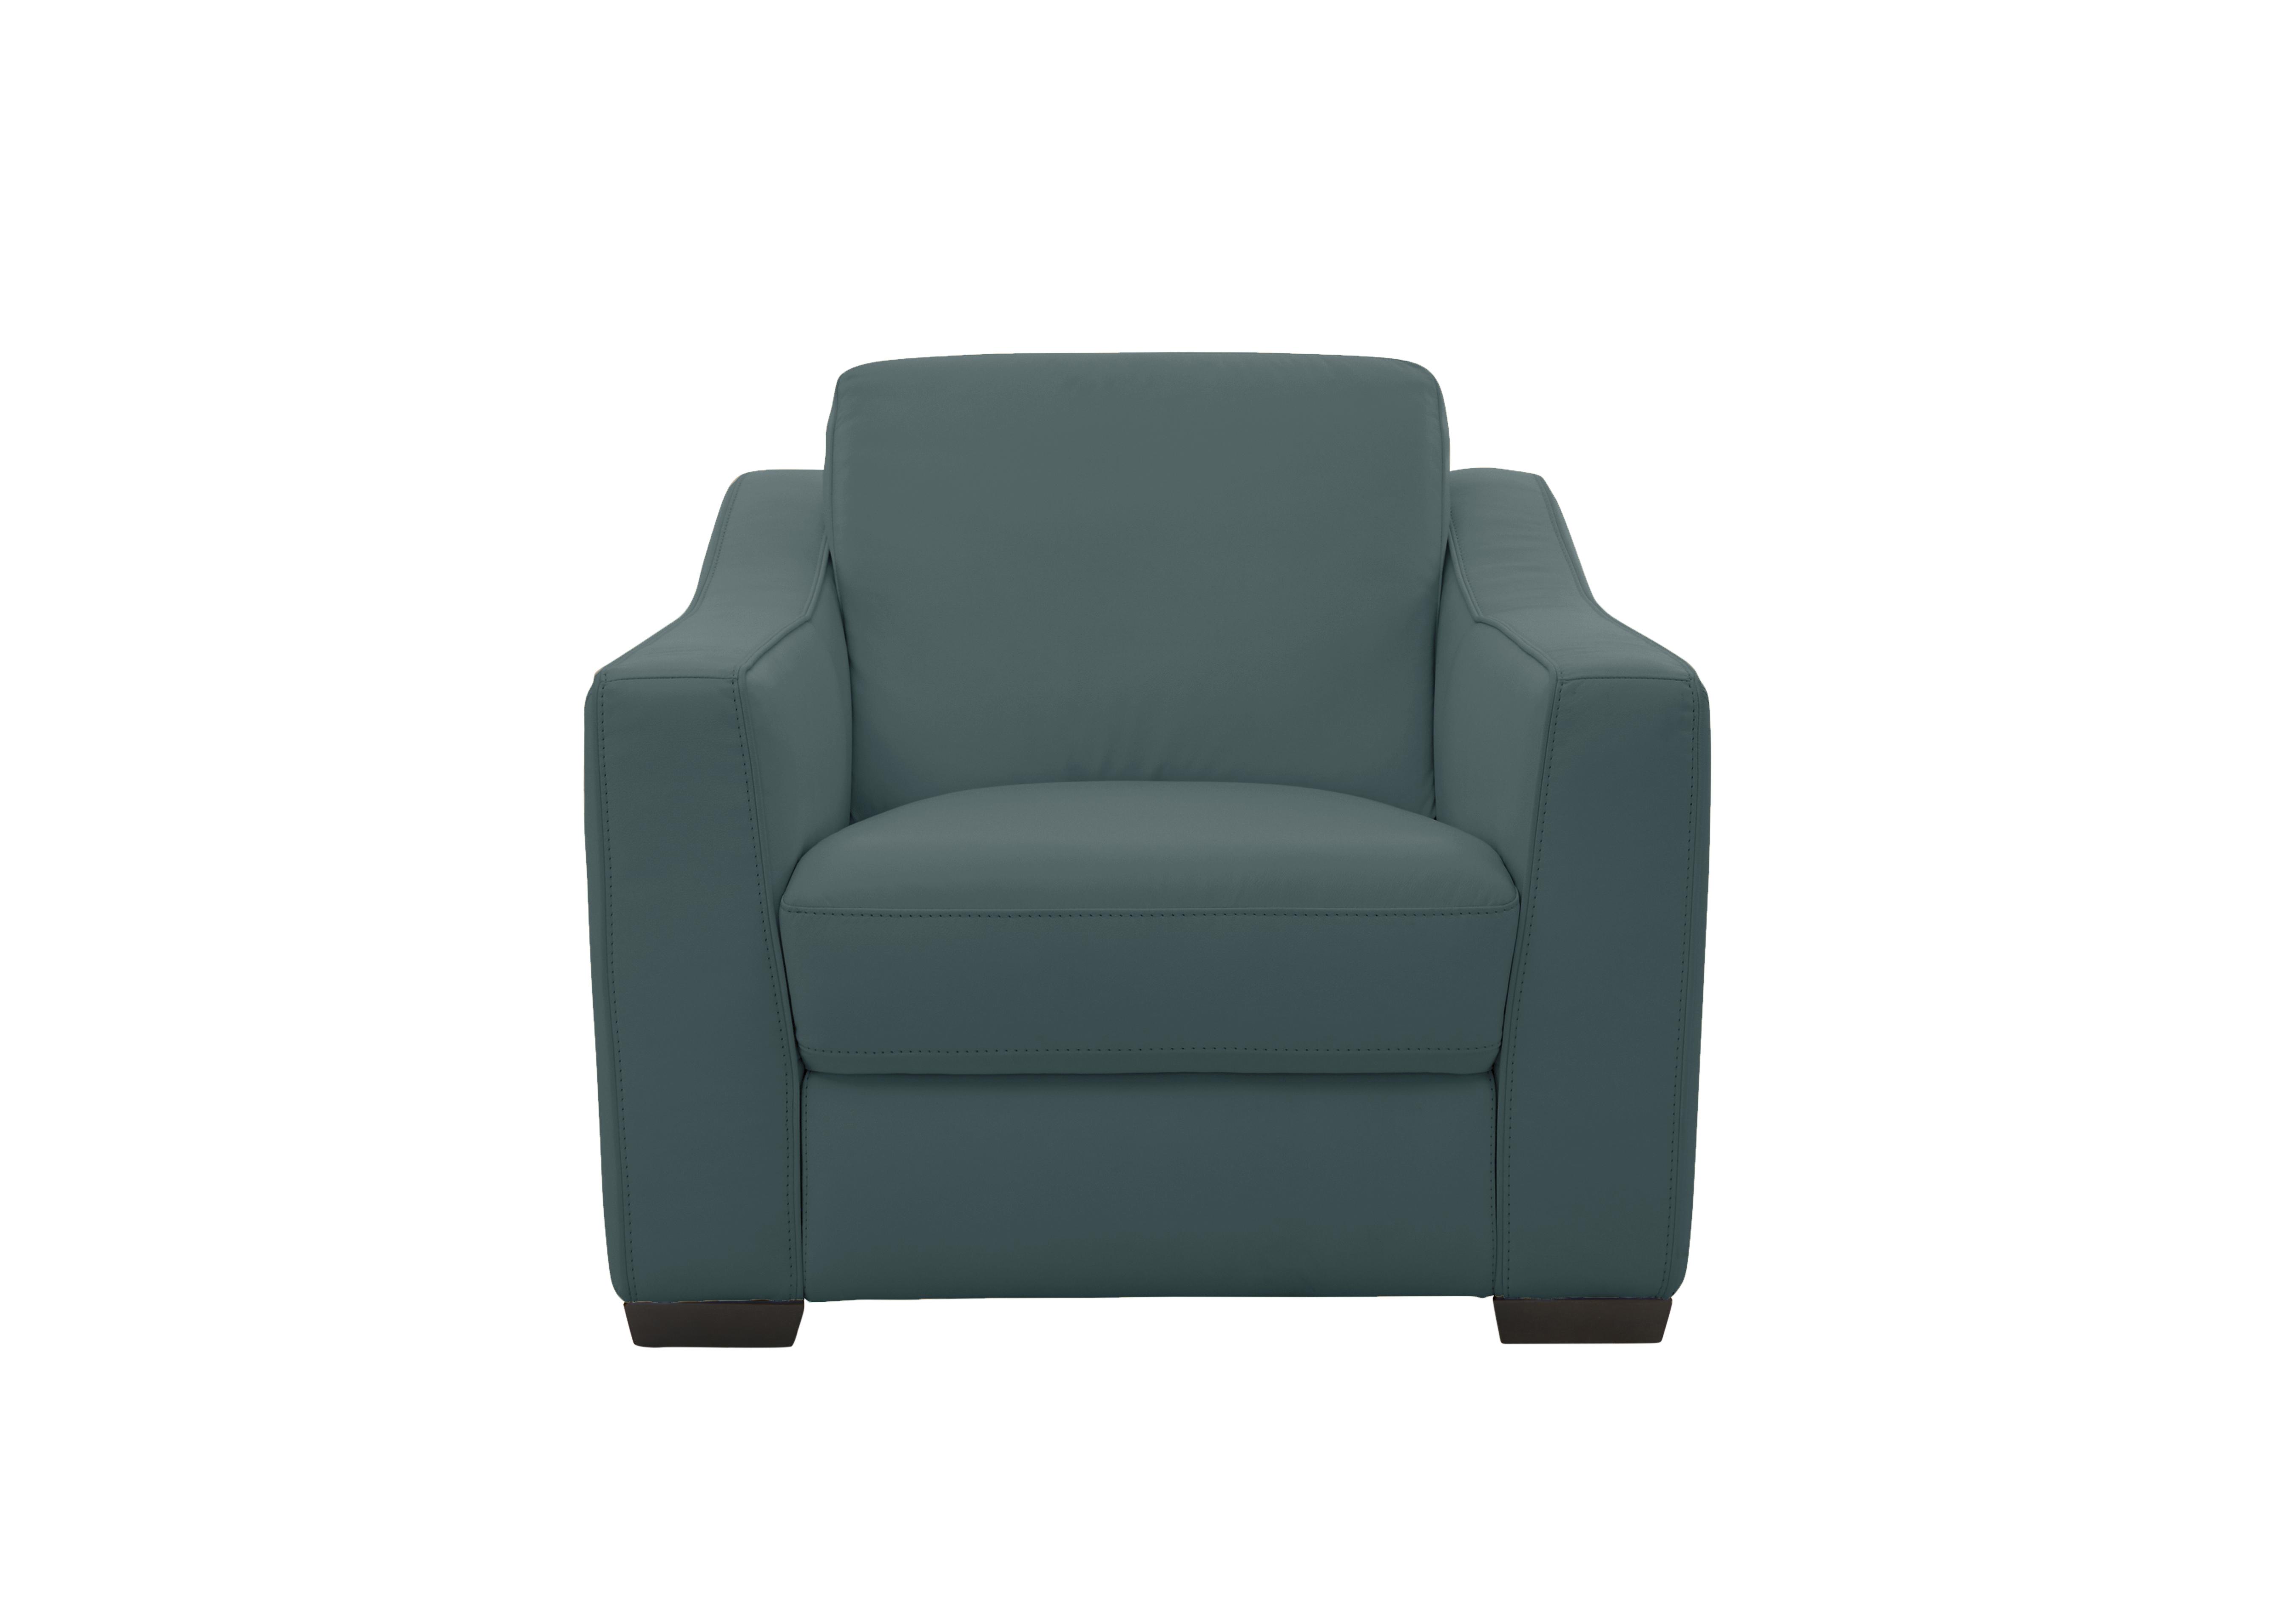 Optimus Leather Armchair in Bv-301e Lake Green on Furniture Village